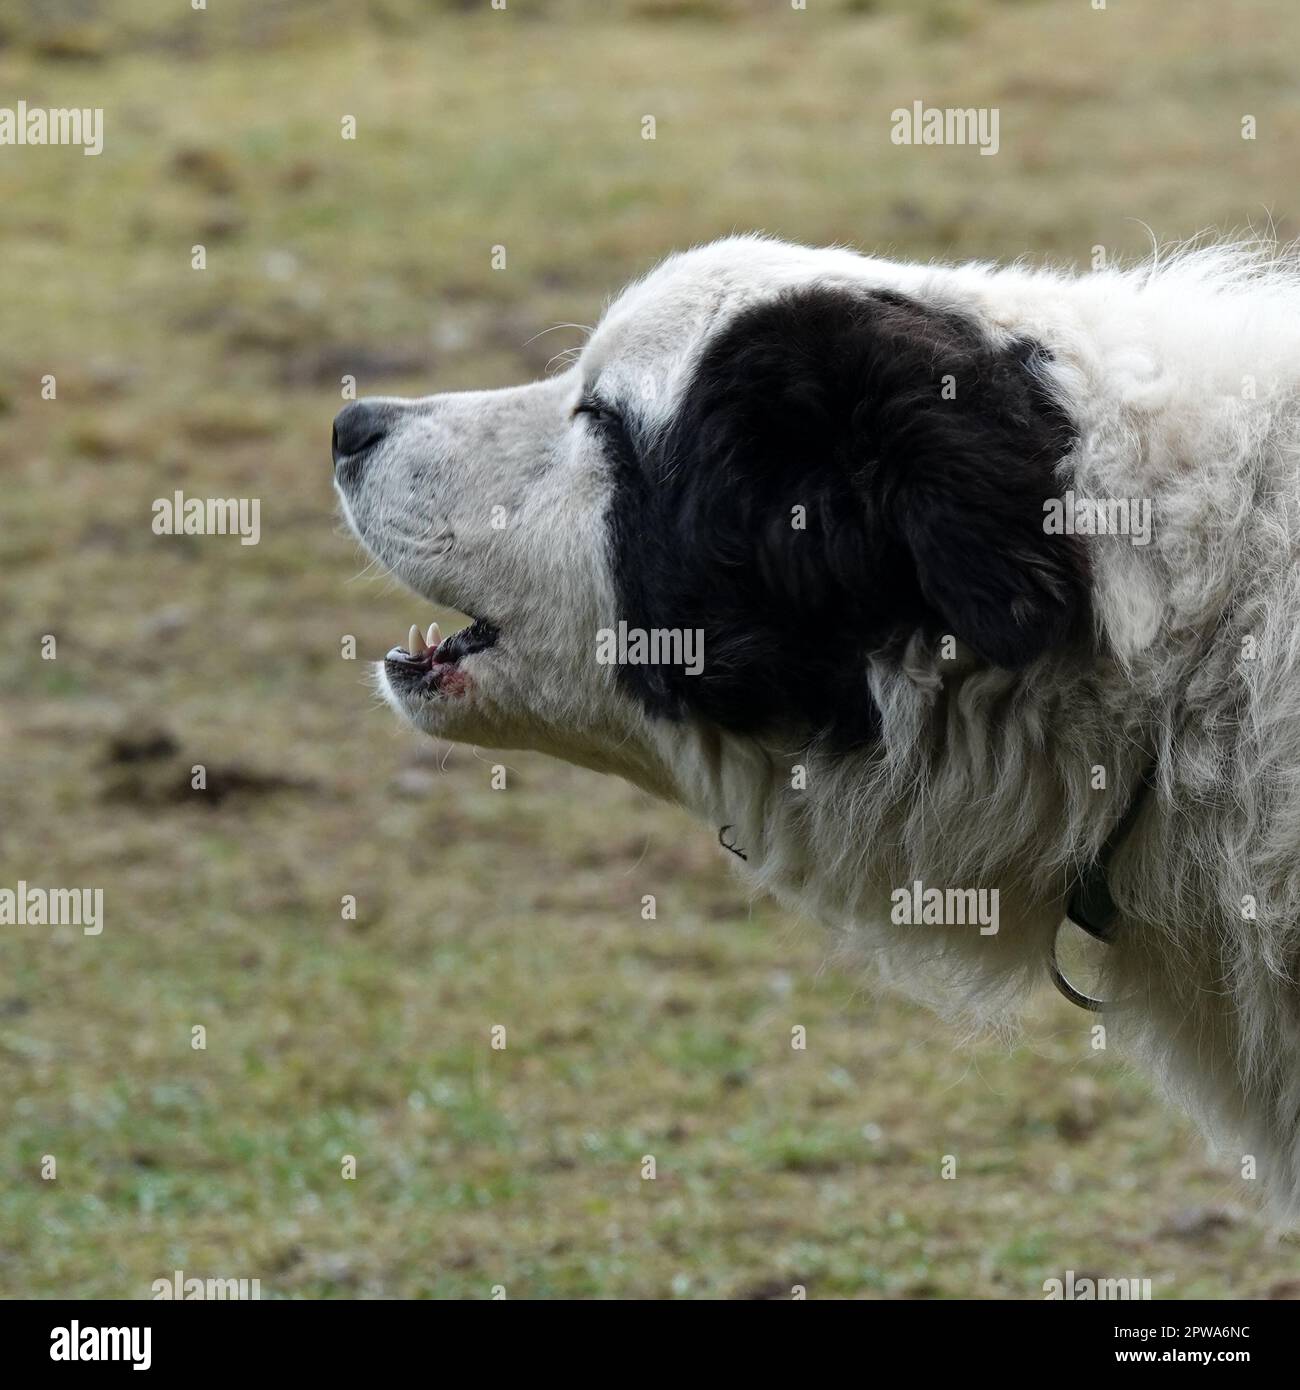 Barking Mastín del Pirineo or Pyrenean Mastiff. He is kept to watch over a sheep herd. Stock Photo